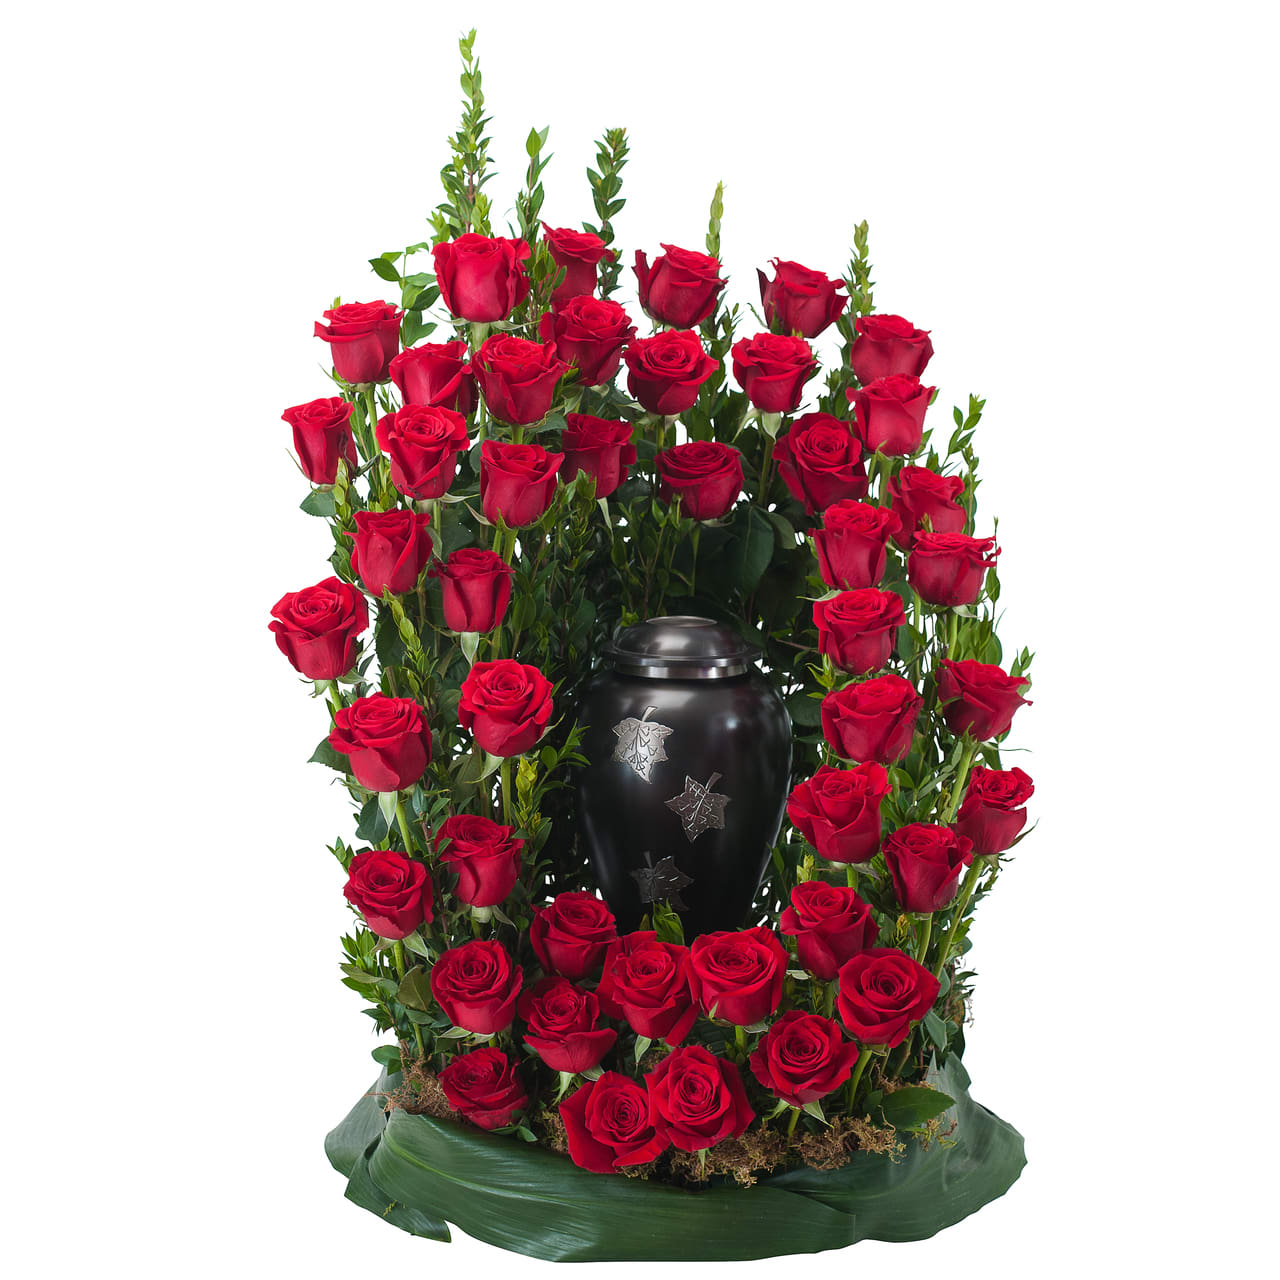 Royal Rose Surround - Red roses and premium foliage combine to make this elegant tribute. TMF-798